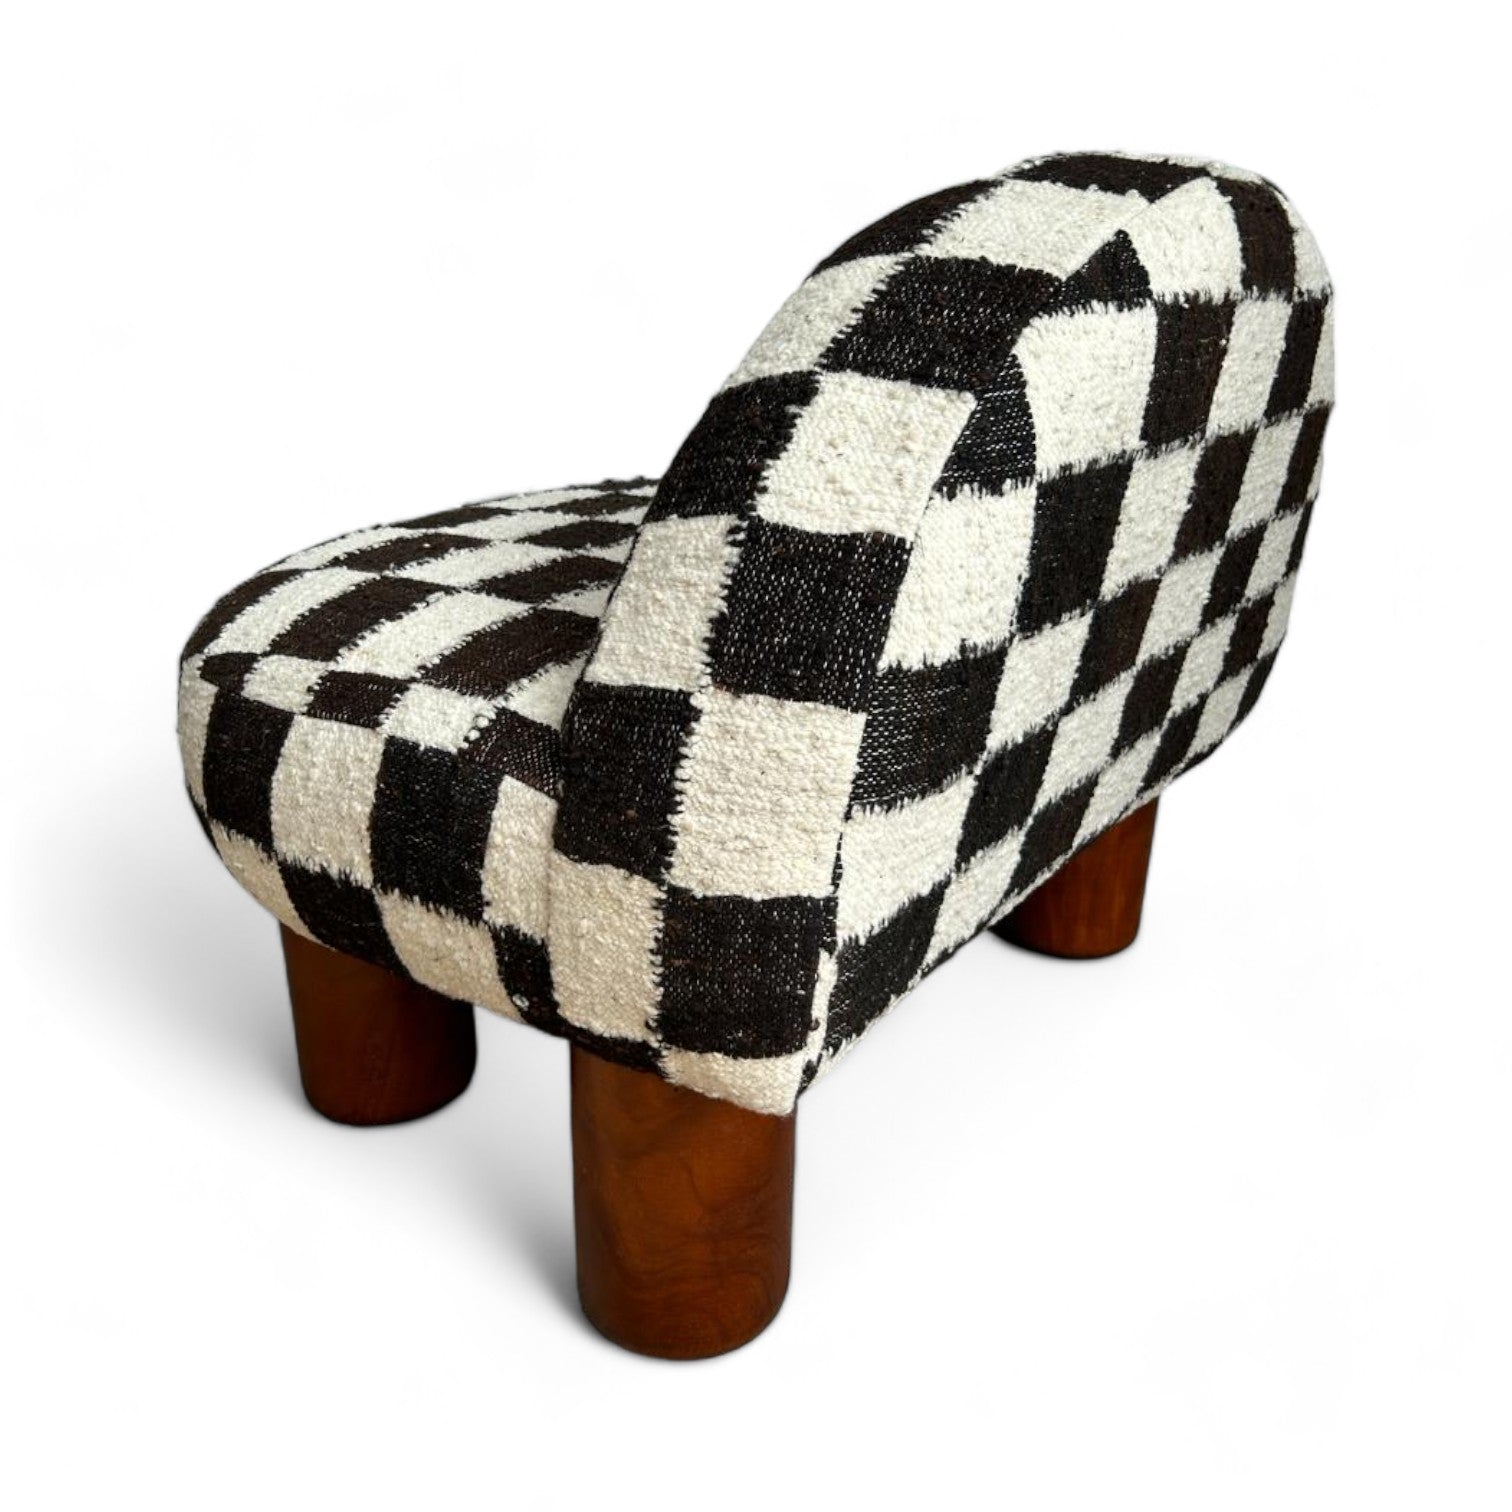 Sofa Checkered by Diego Olivero